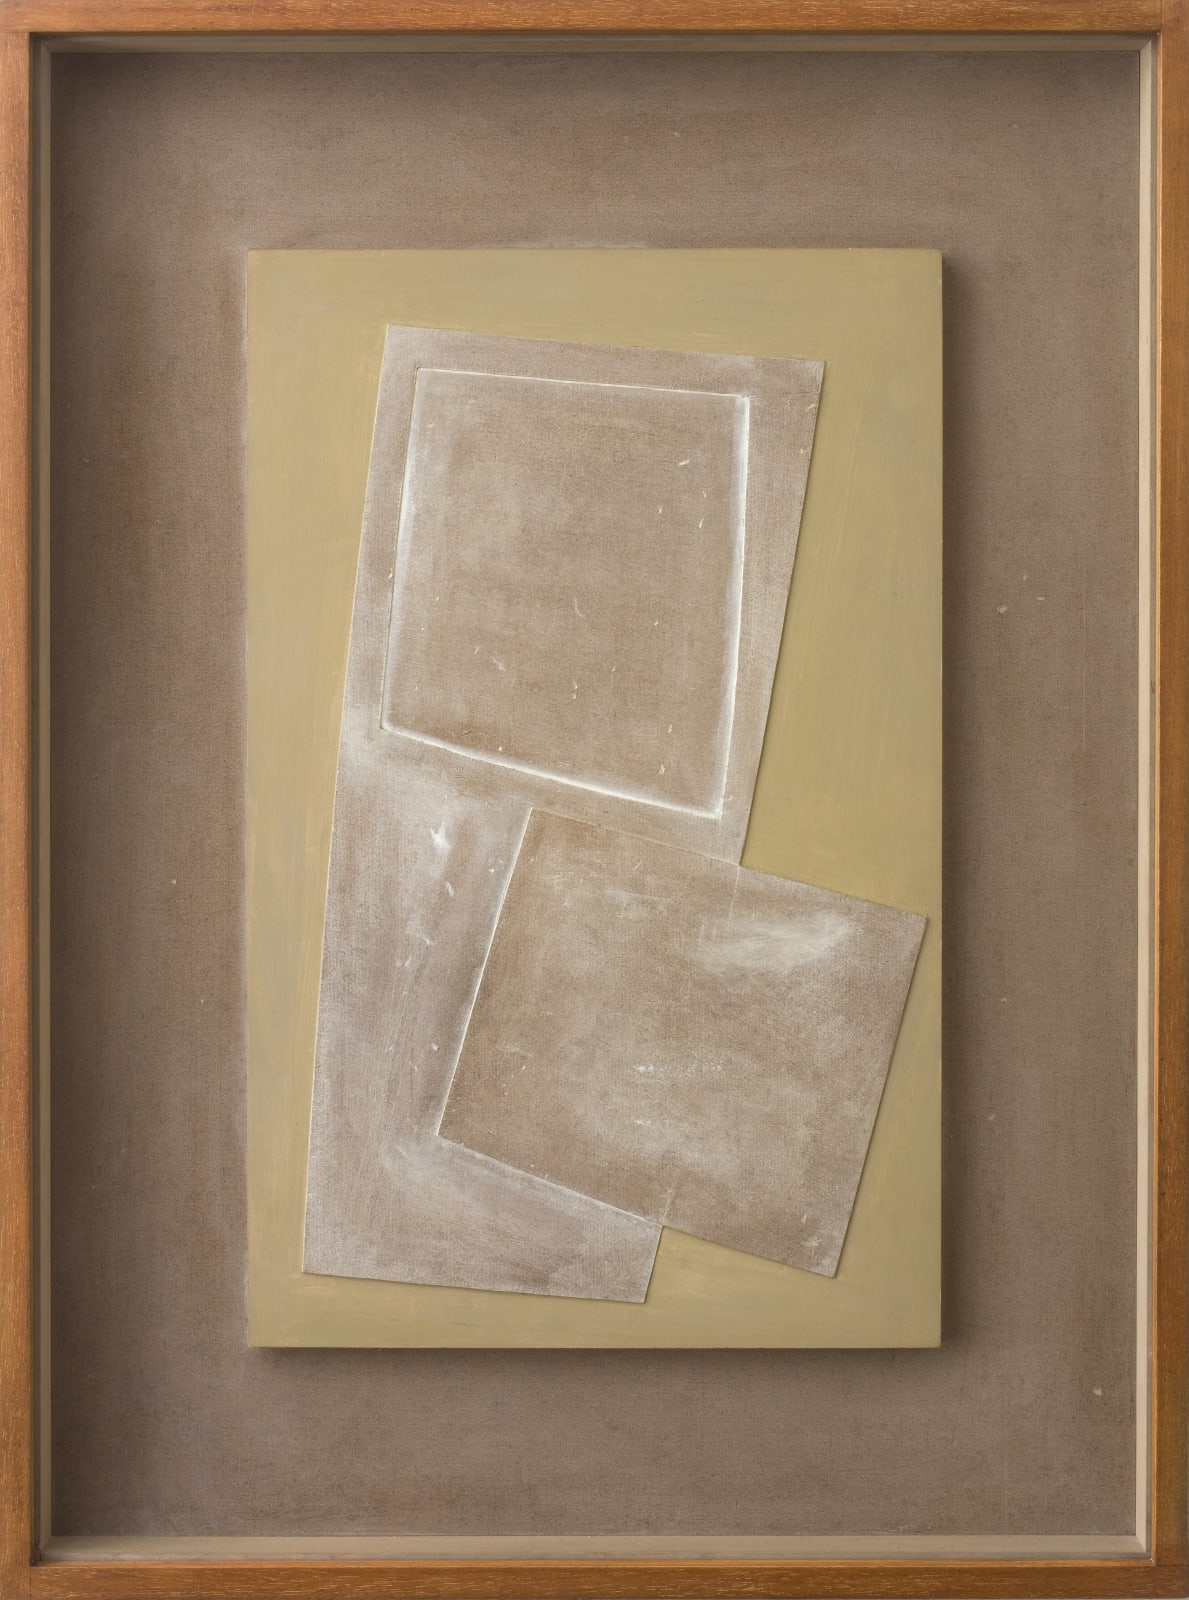 Ben Nicholson, 1971 (two squares and very green), 1971